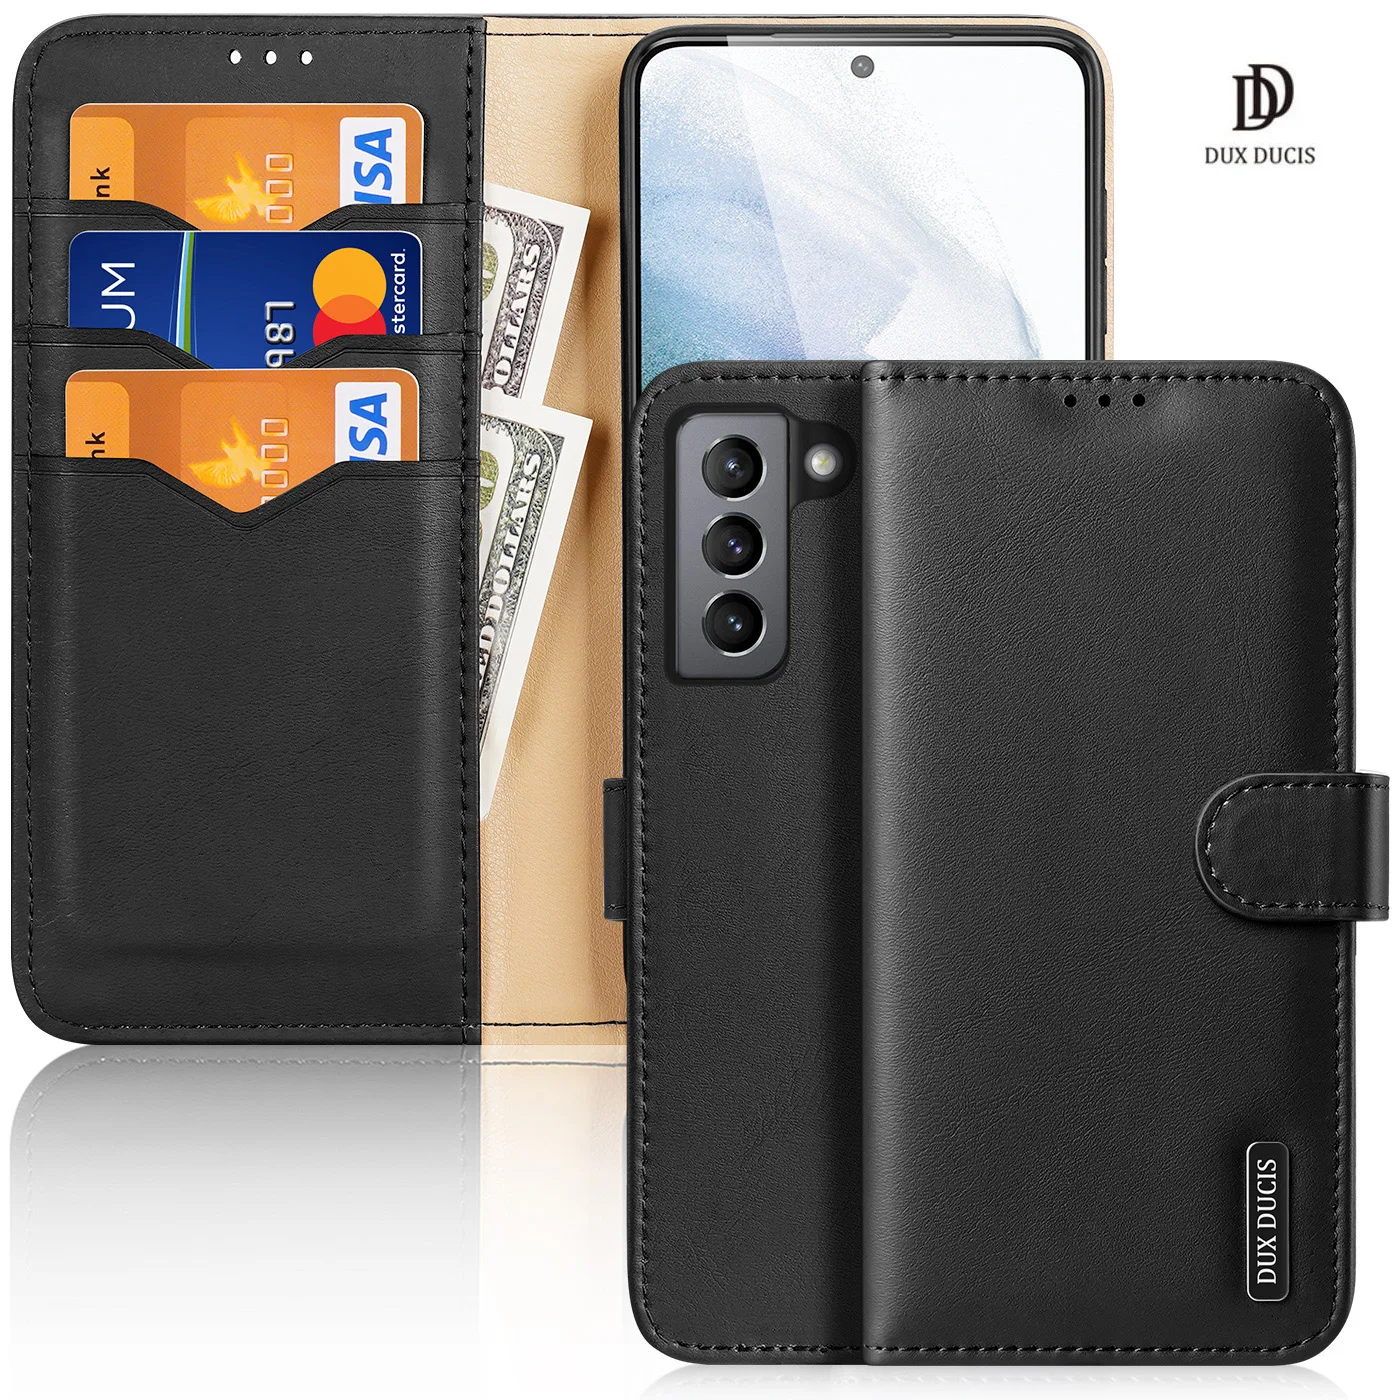 

For Samsung Galaxy S21 FE Case DUX DUCIS Hivo Series Flip Cover Luxury Leather Wallet Case Full Good Protection Steady Stand